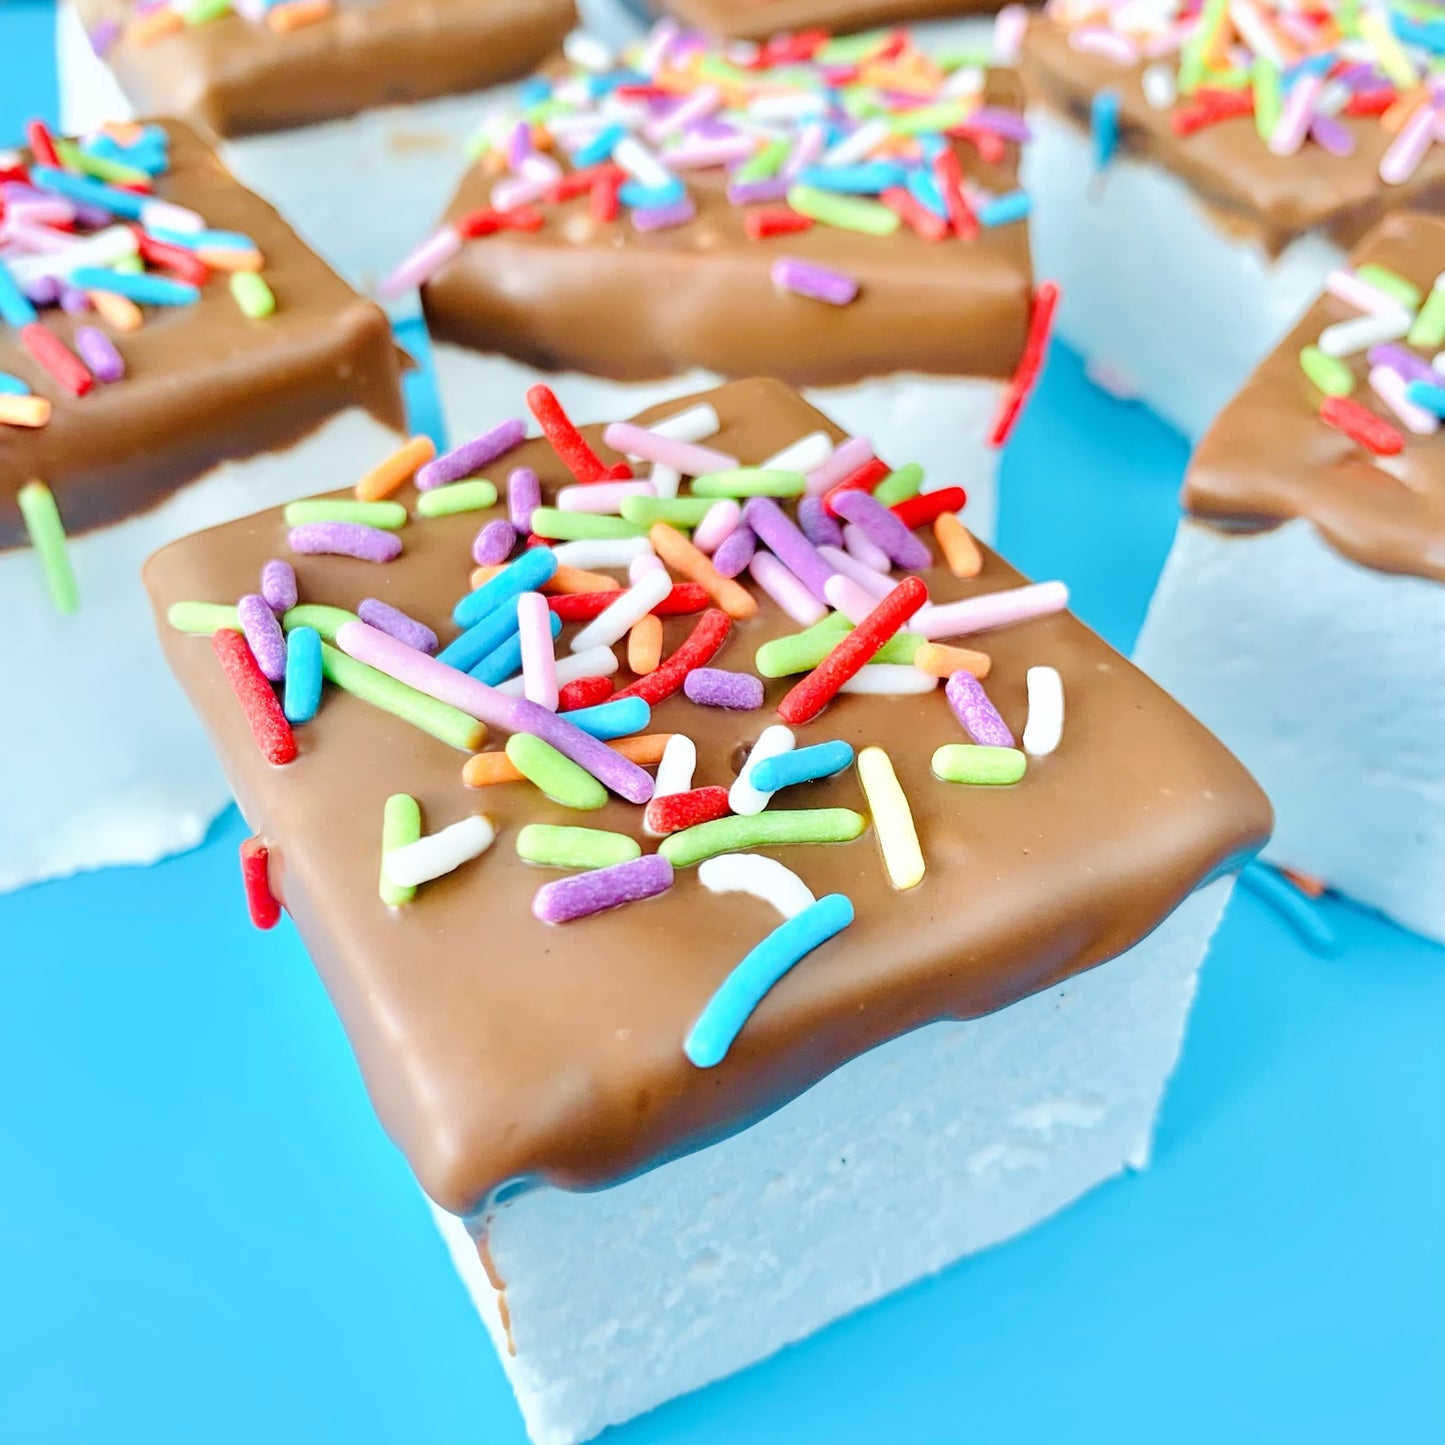 Belgian Chocolate dipped Marshmallow with Rainbow Sprinkles